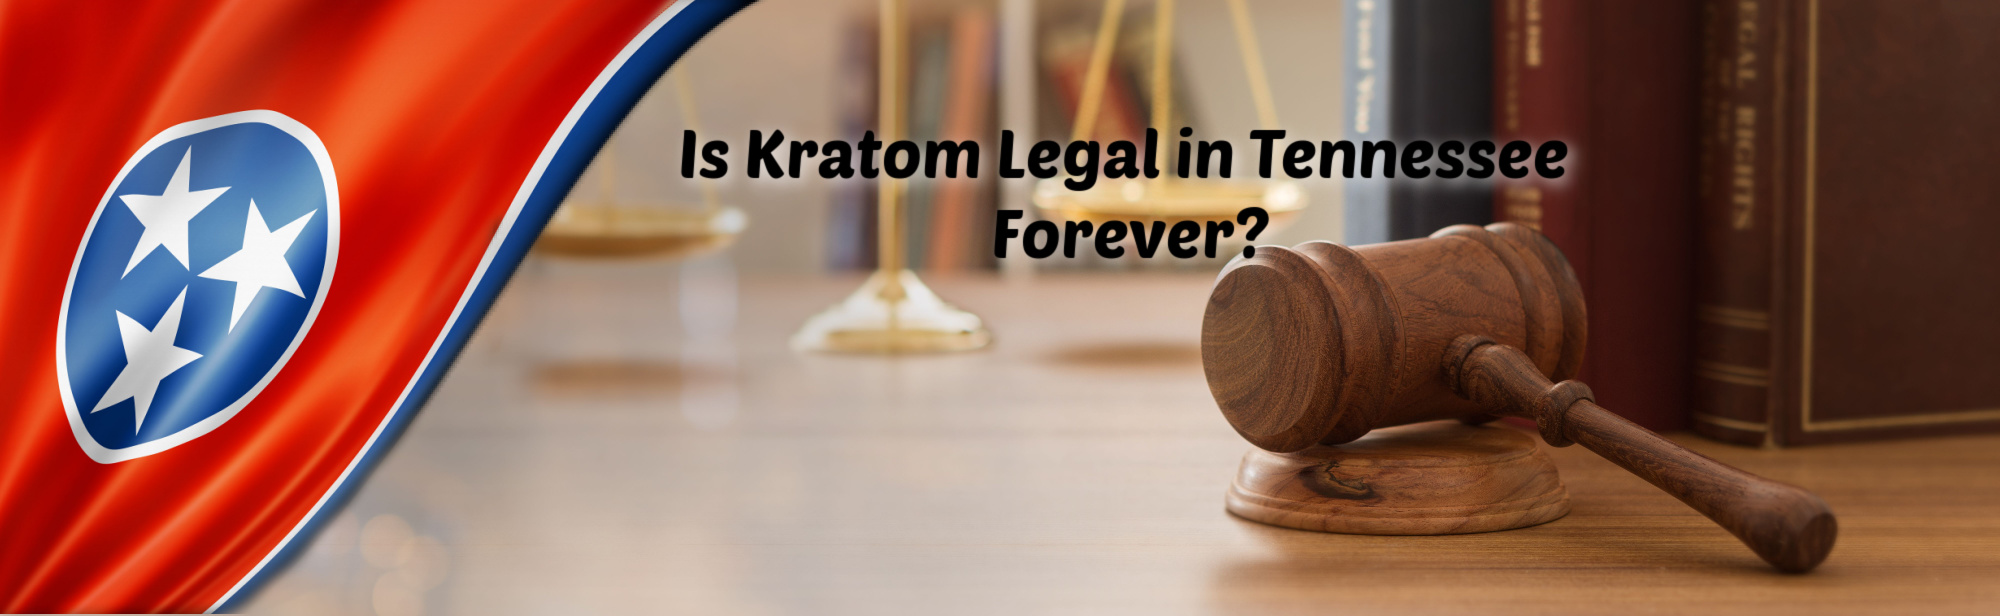 image of is kratom legal in tennessee forever